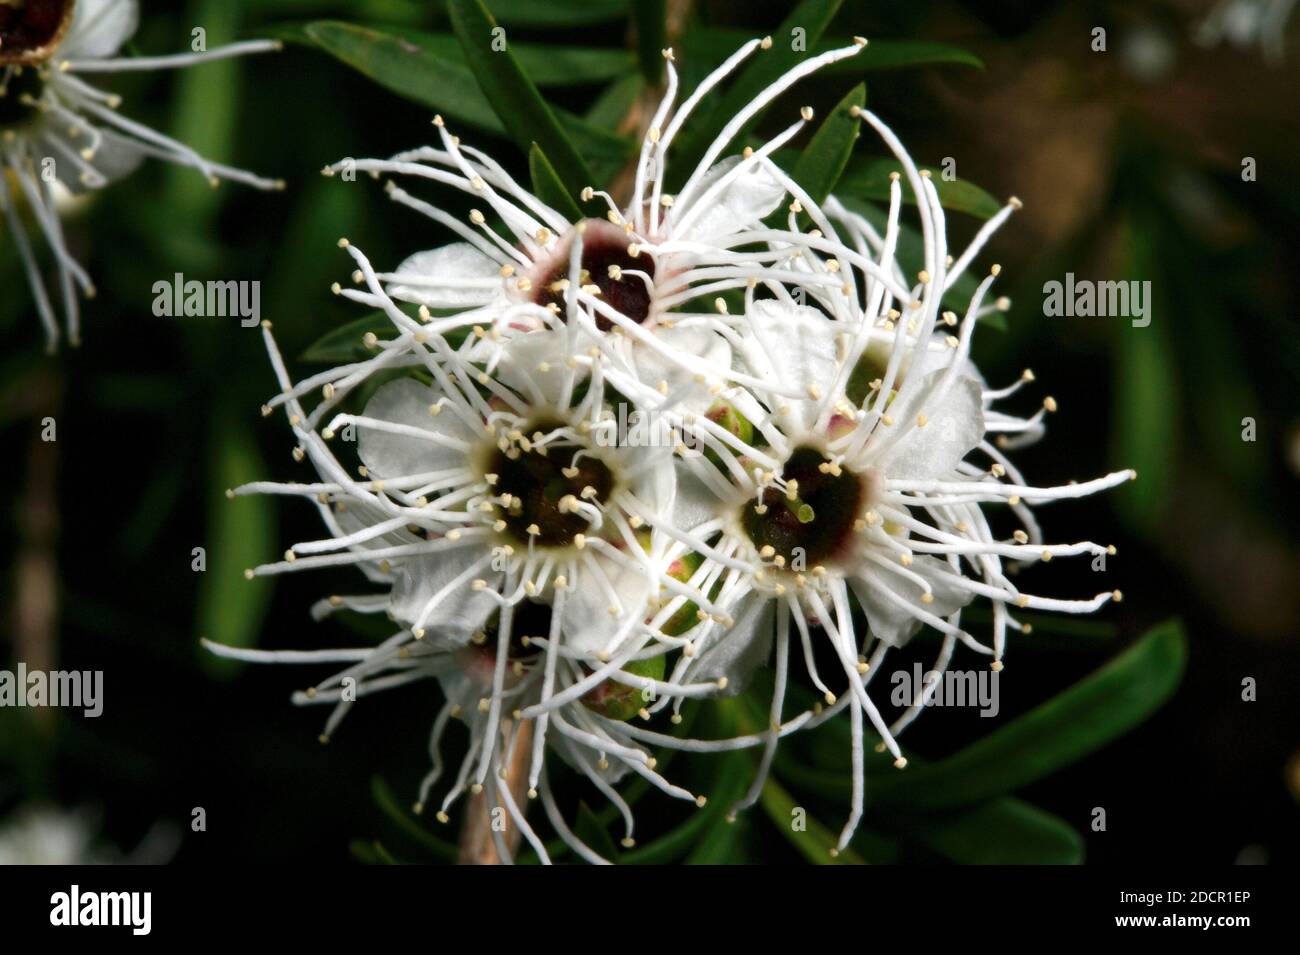 Burgan flowers are quite spectacular when you see them close up - and when you see the whole tree covered in flowers! Stock Photo